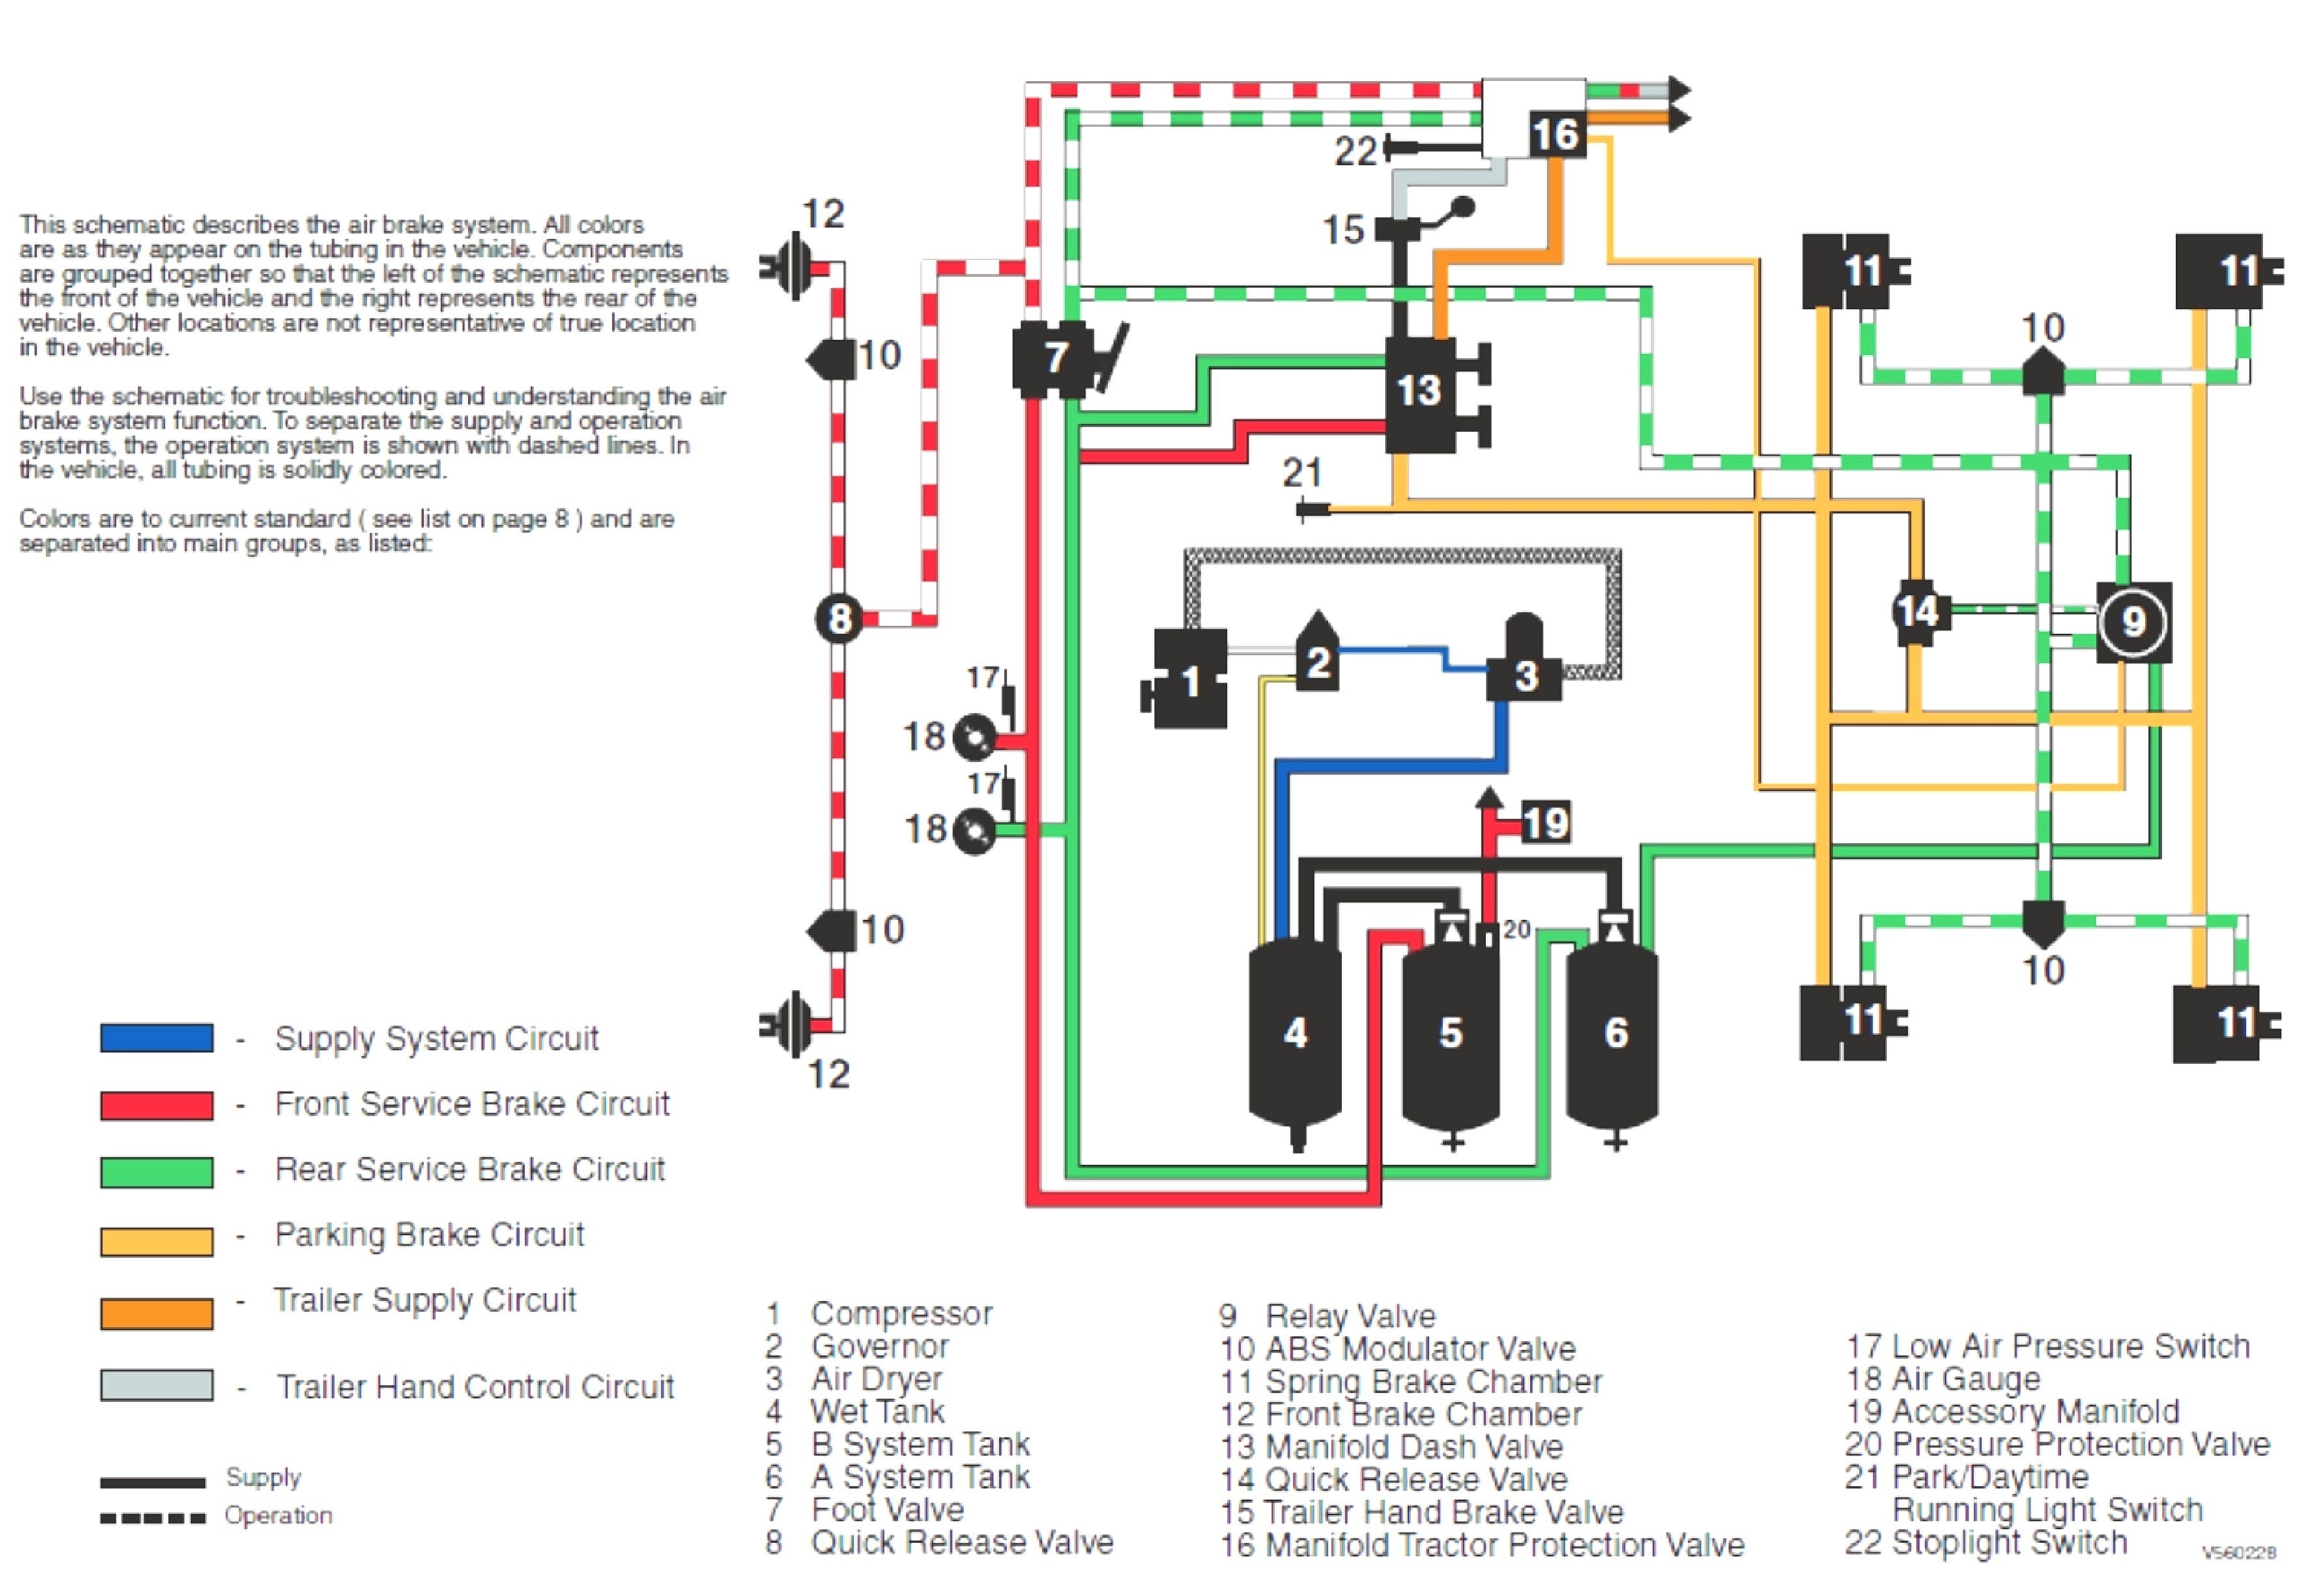 tow light wiring diagram Collection Wiring Diagrams For Utility Trailer Refrence Utility Trailer Wiring Diagram DOWNLOAD Wiring Diagram